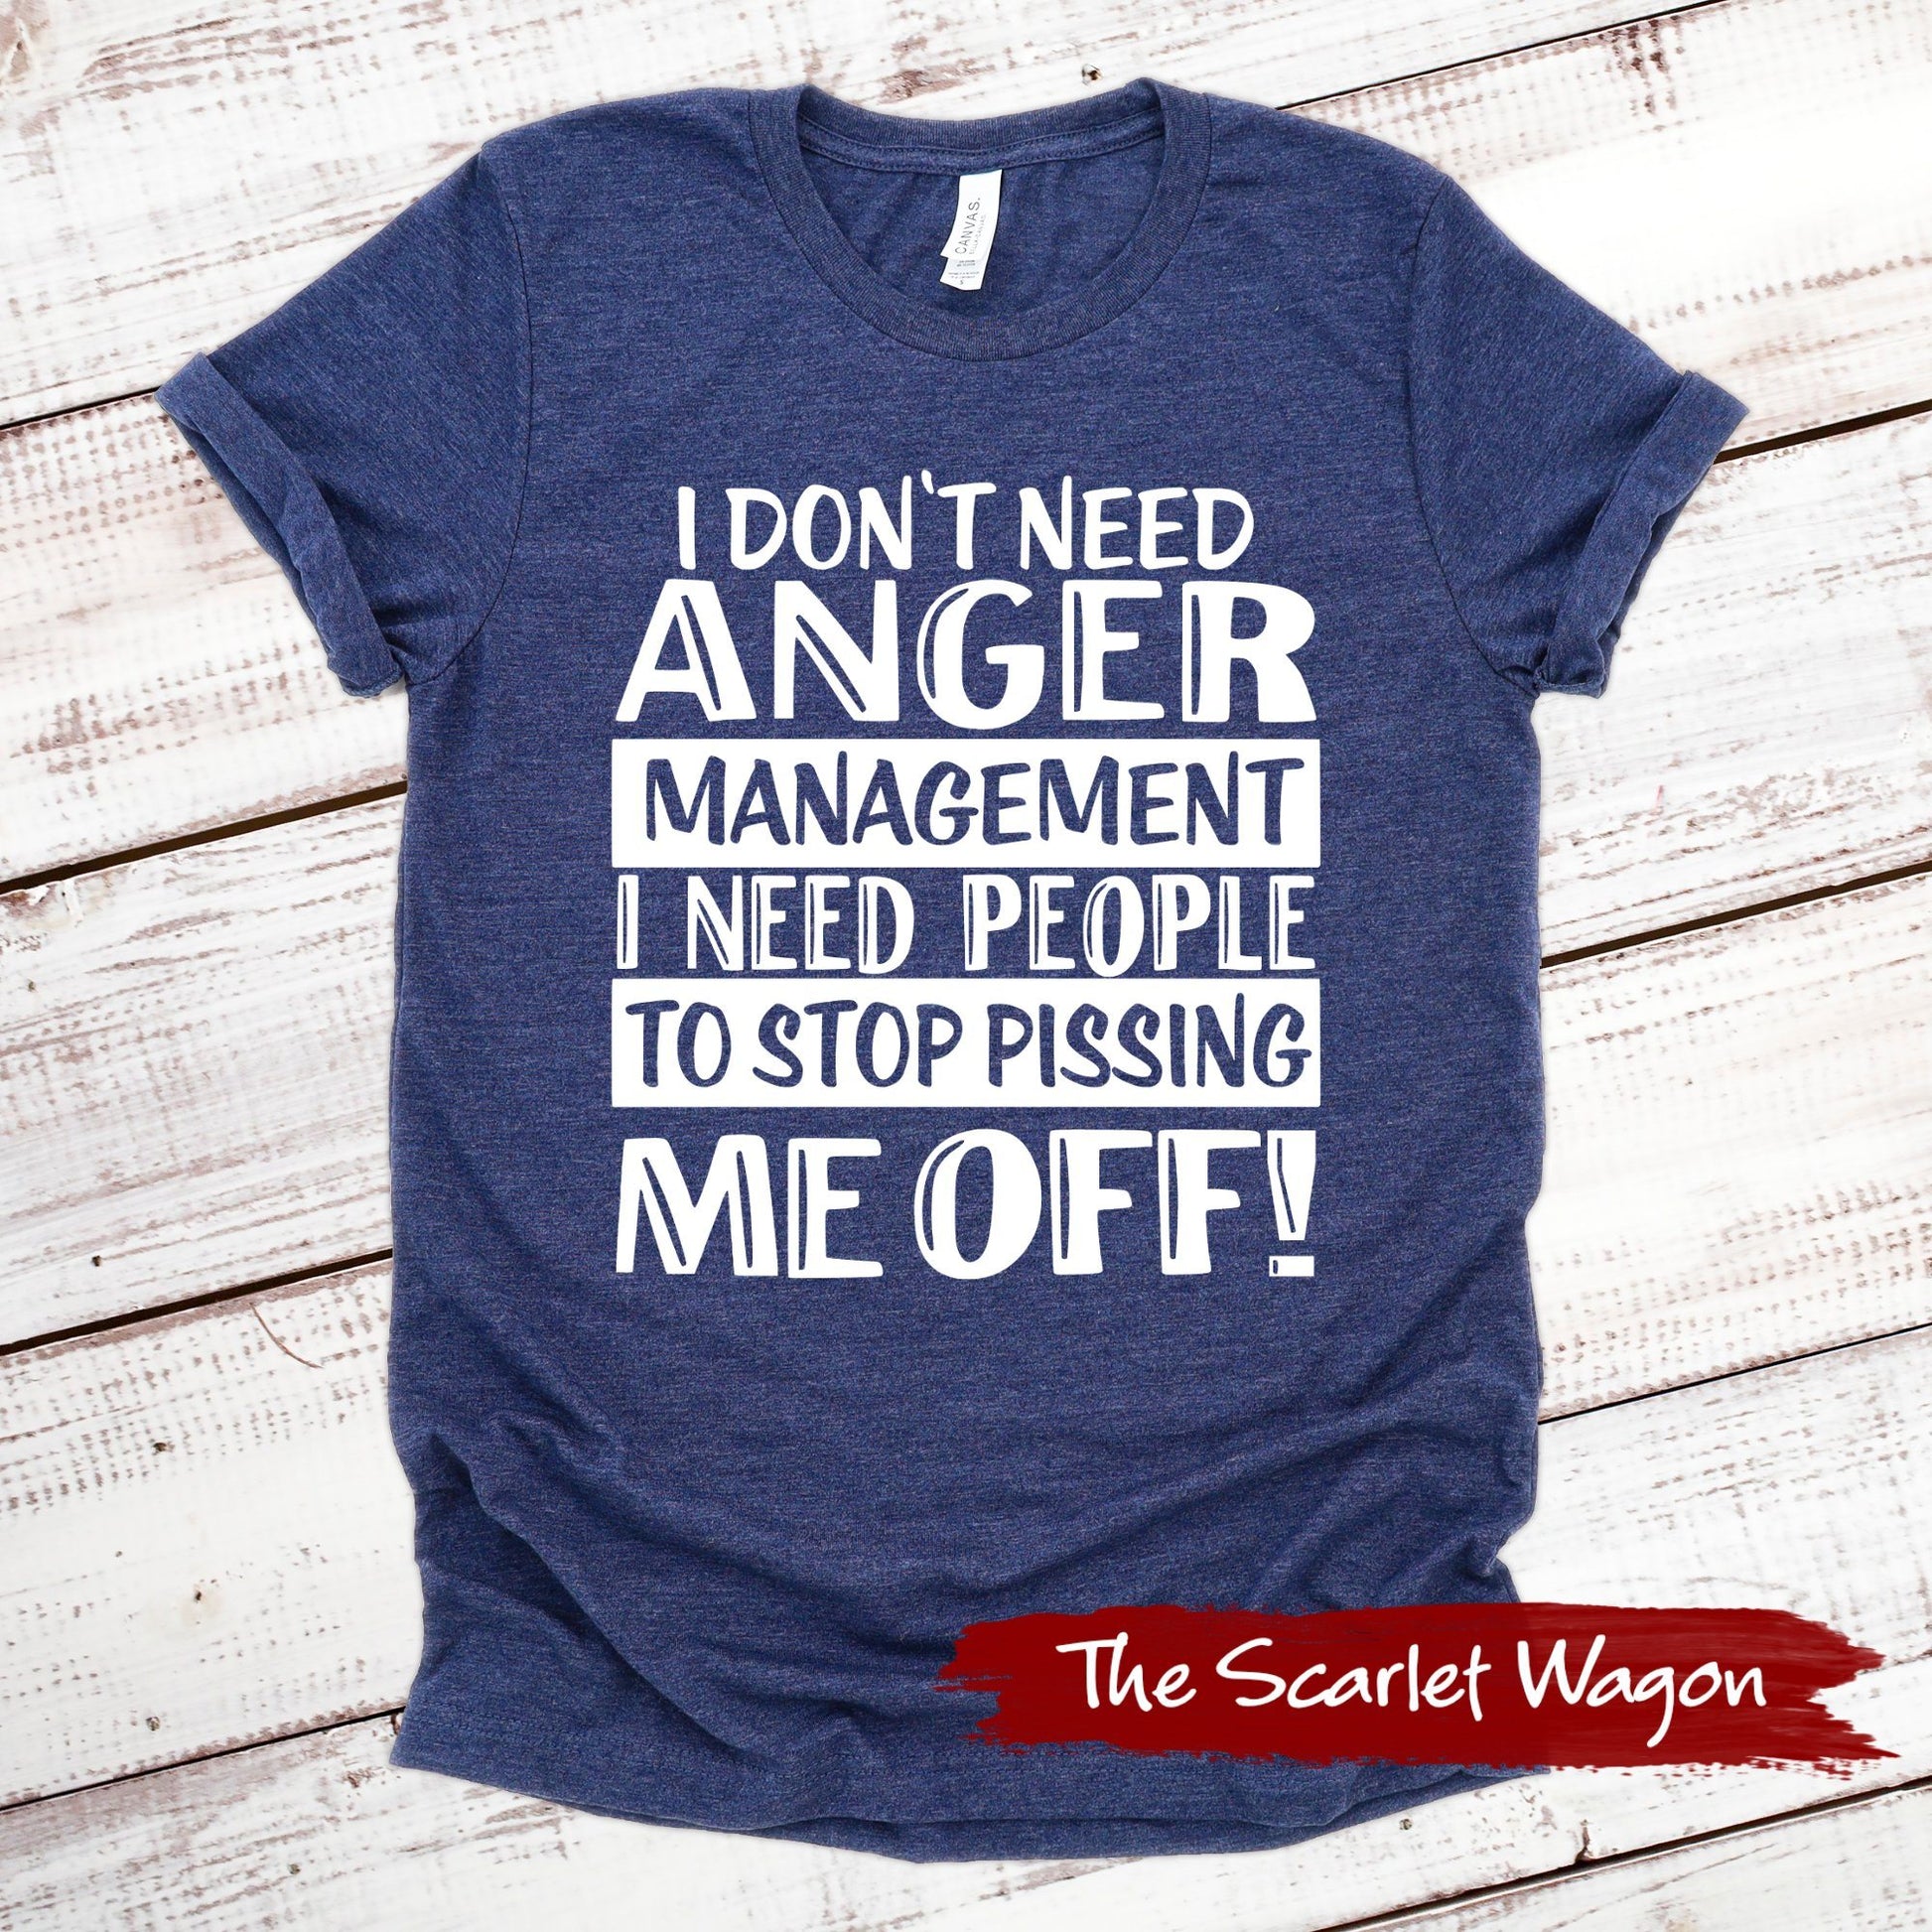 I Don't Need Anger Management Funny Shirt Scarlet Wagon Heather Navy XS 